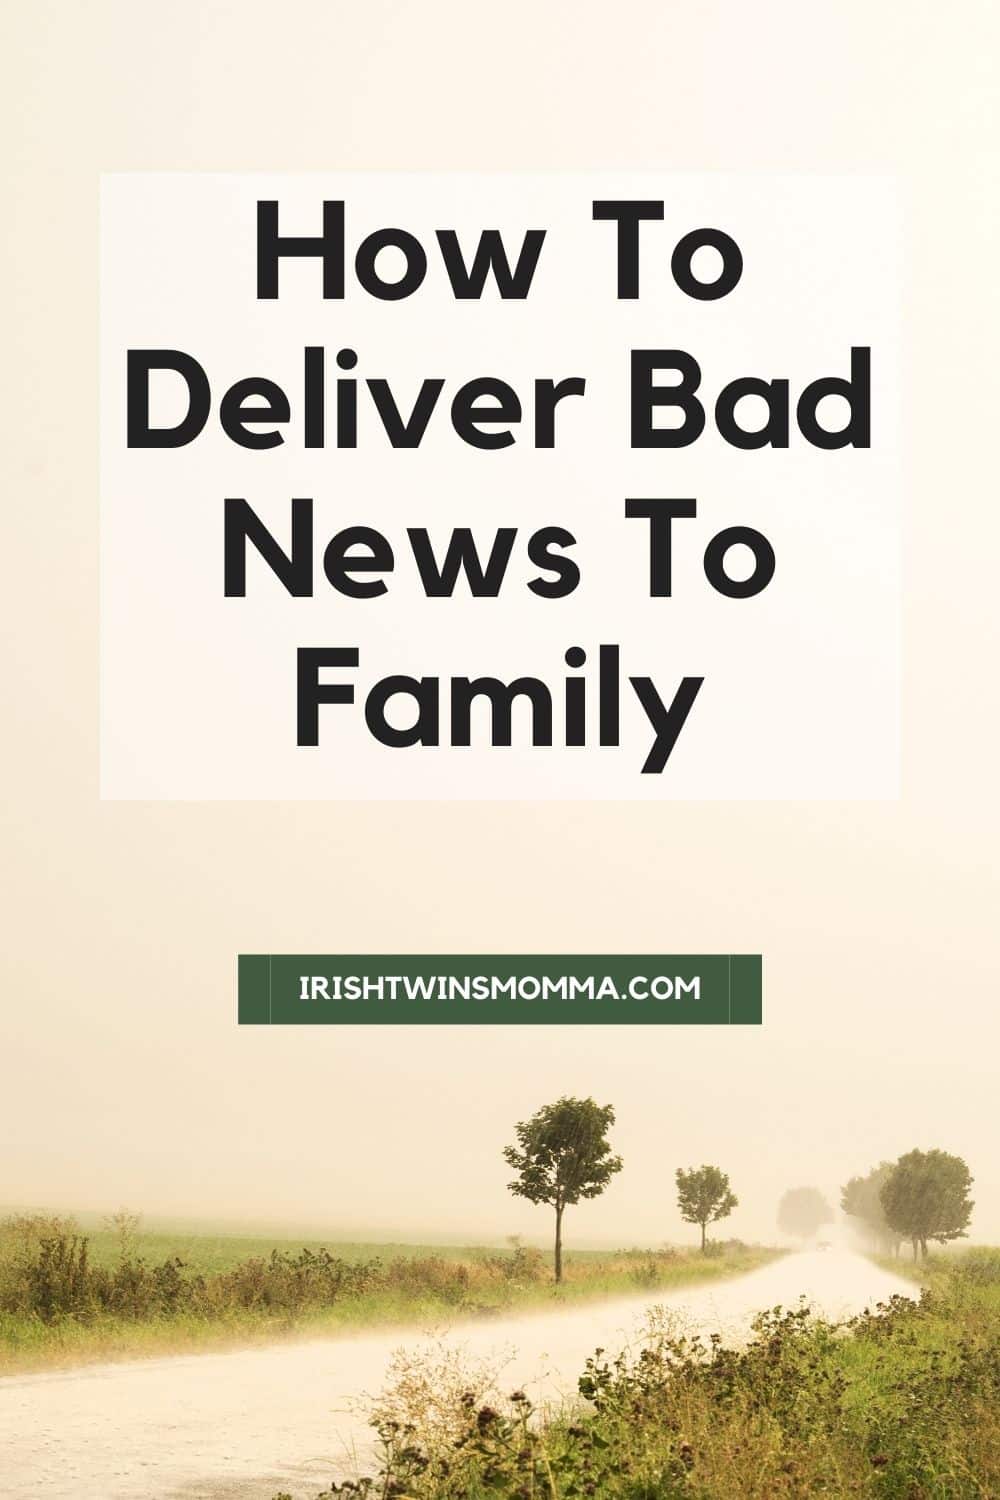 How To Deliver Bad News To Family